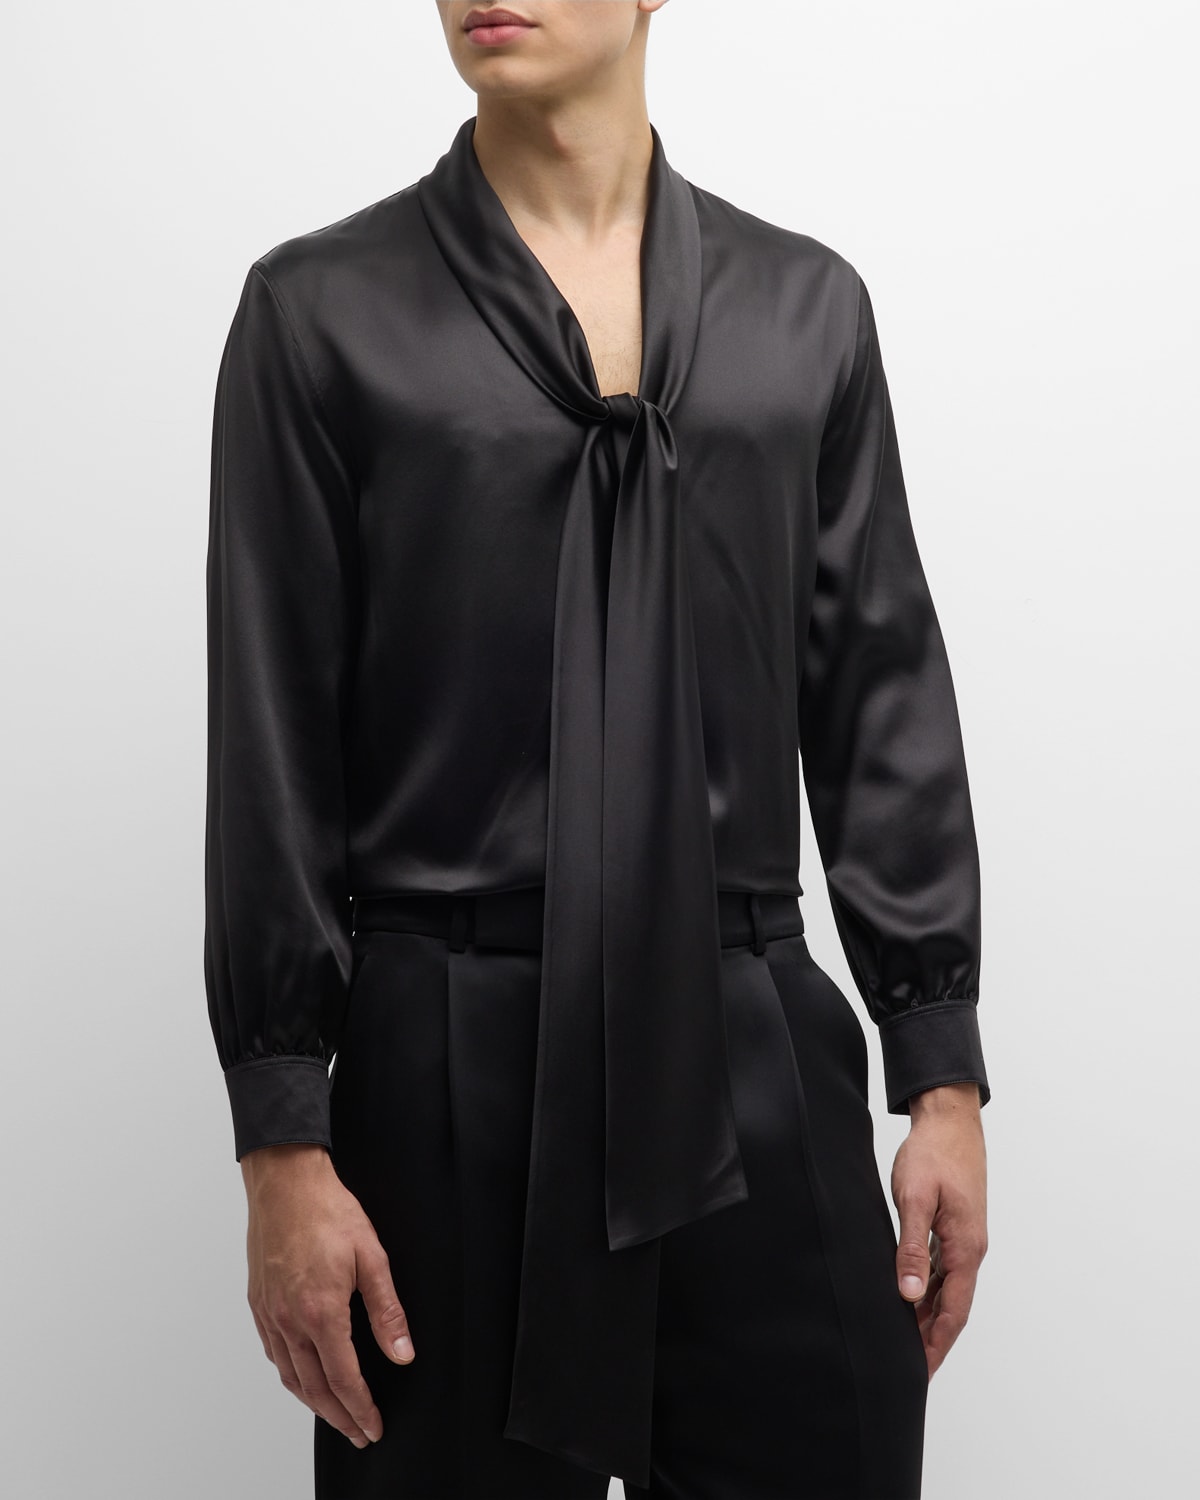 Men's Silk Shirt with Bow